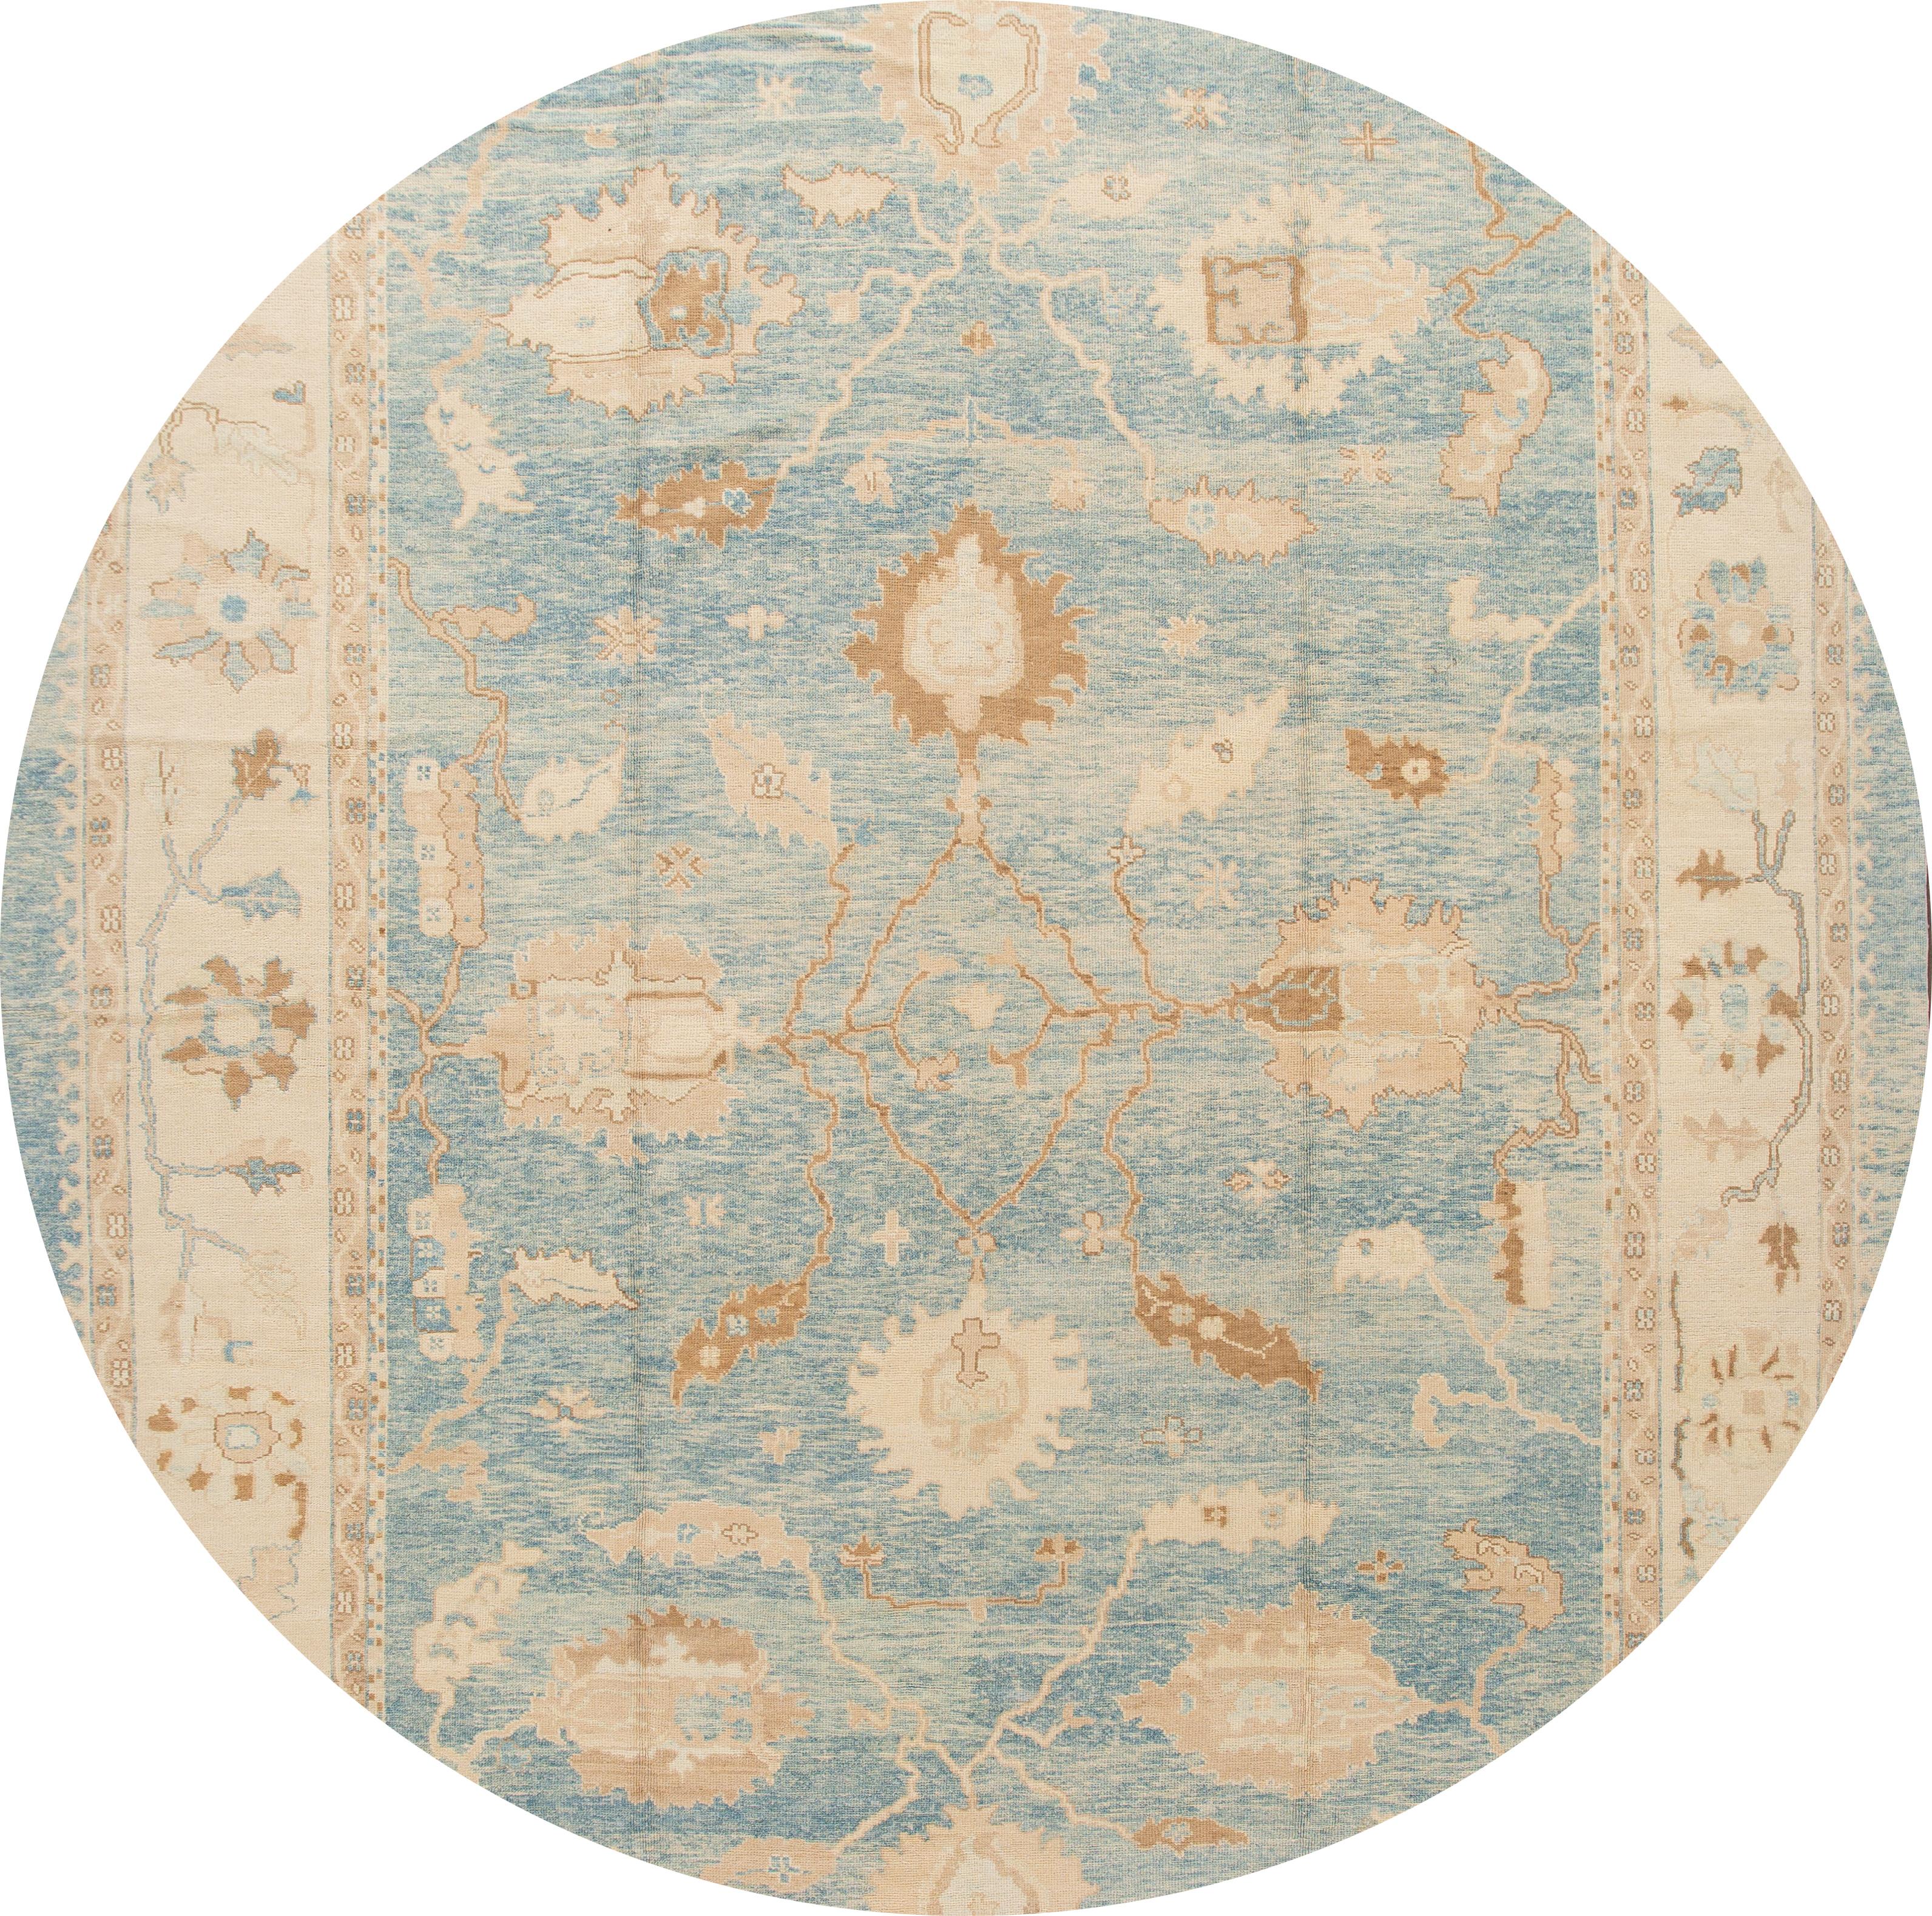 Beautiful contemporary oversize Turkish Oushak rug, hand knotted wool with a blue field, cream frame, tan and brown accents in an allover design.
This rug measures 12' 8